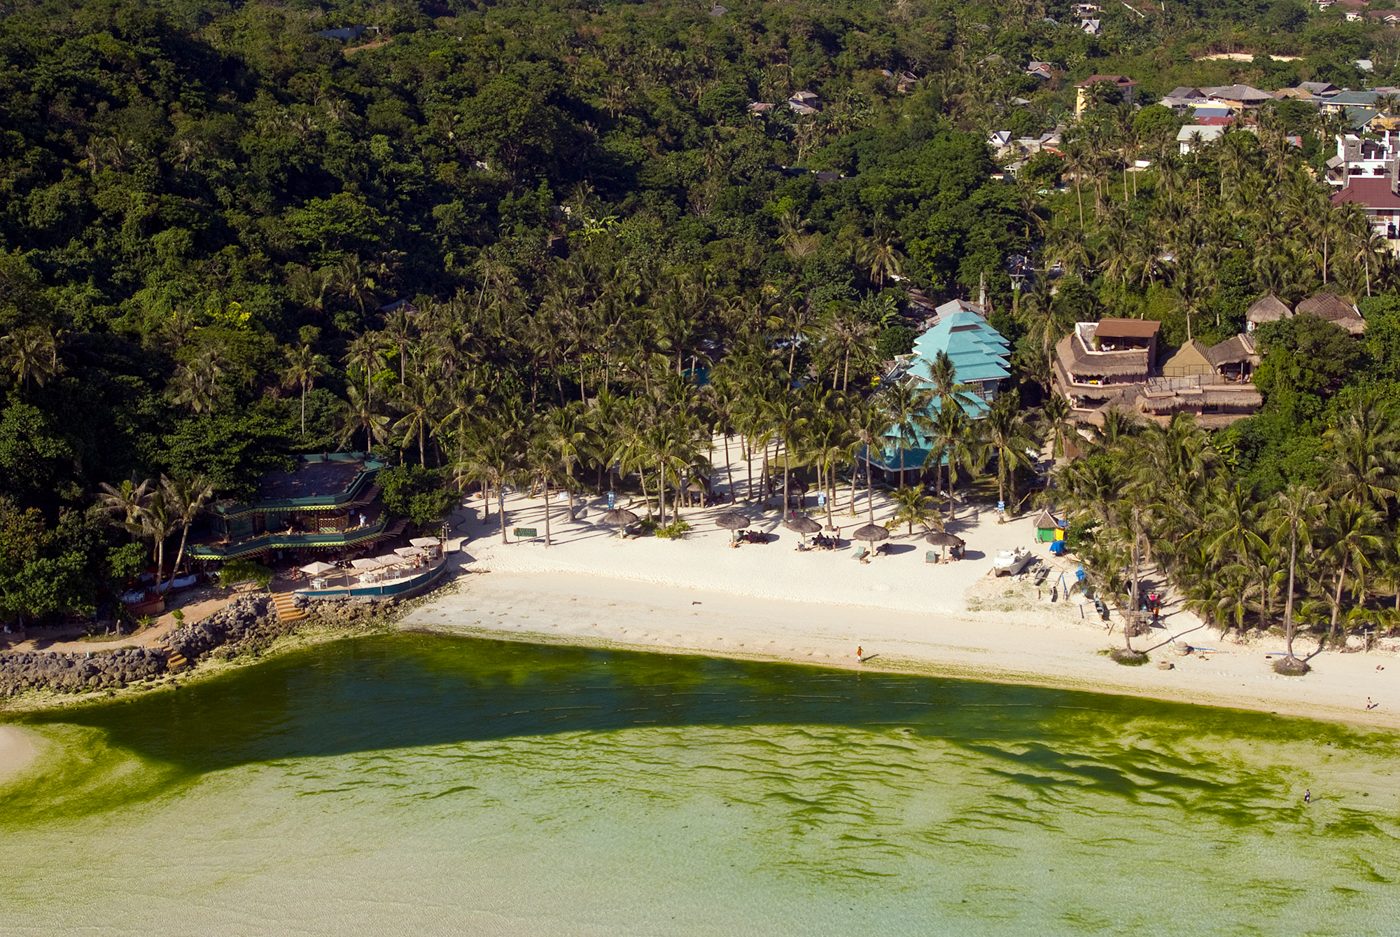 Duterte signs proclamation placing 3 barangays in Boracay under state of calamity